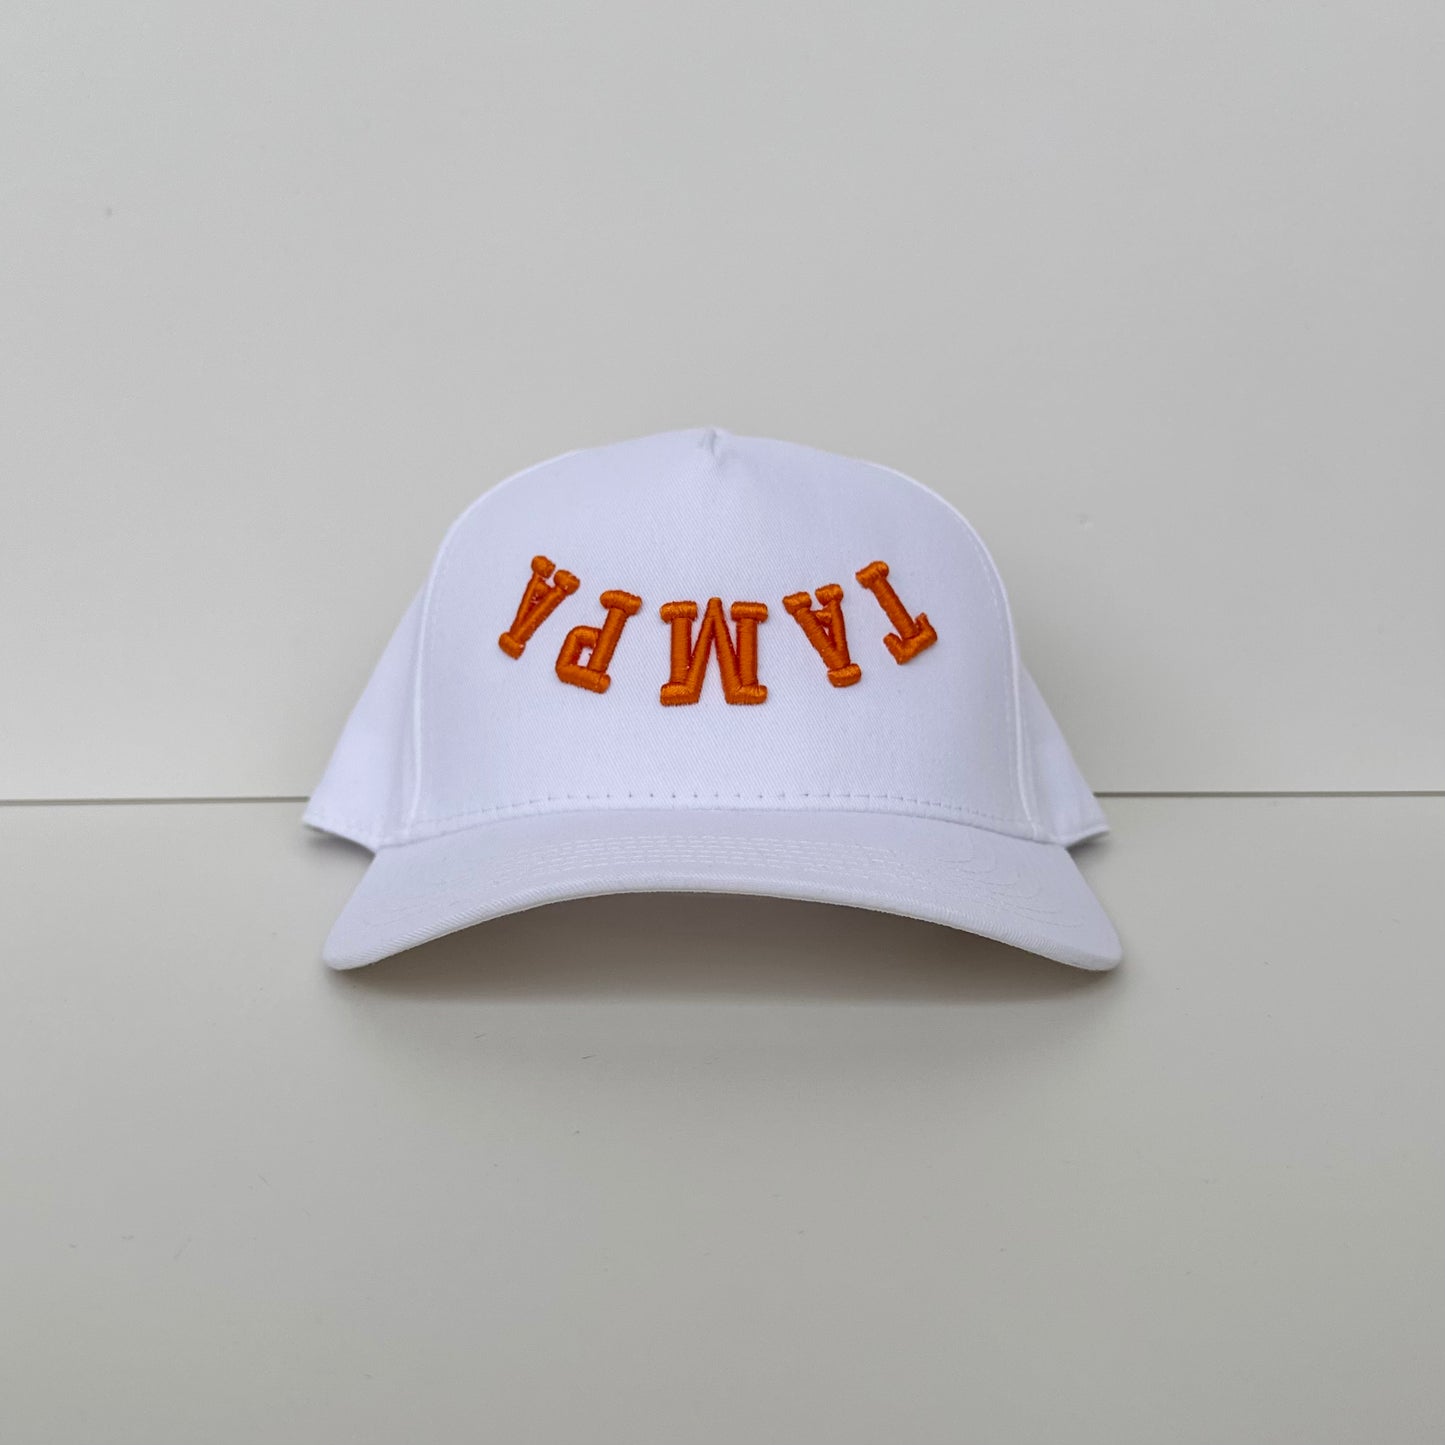 The Tampa Hat - Creamsicle